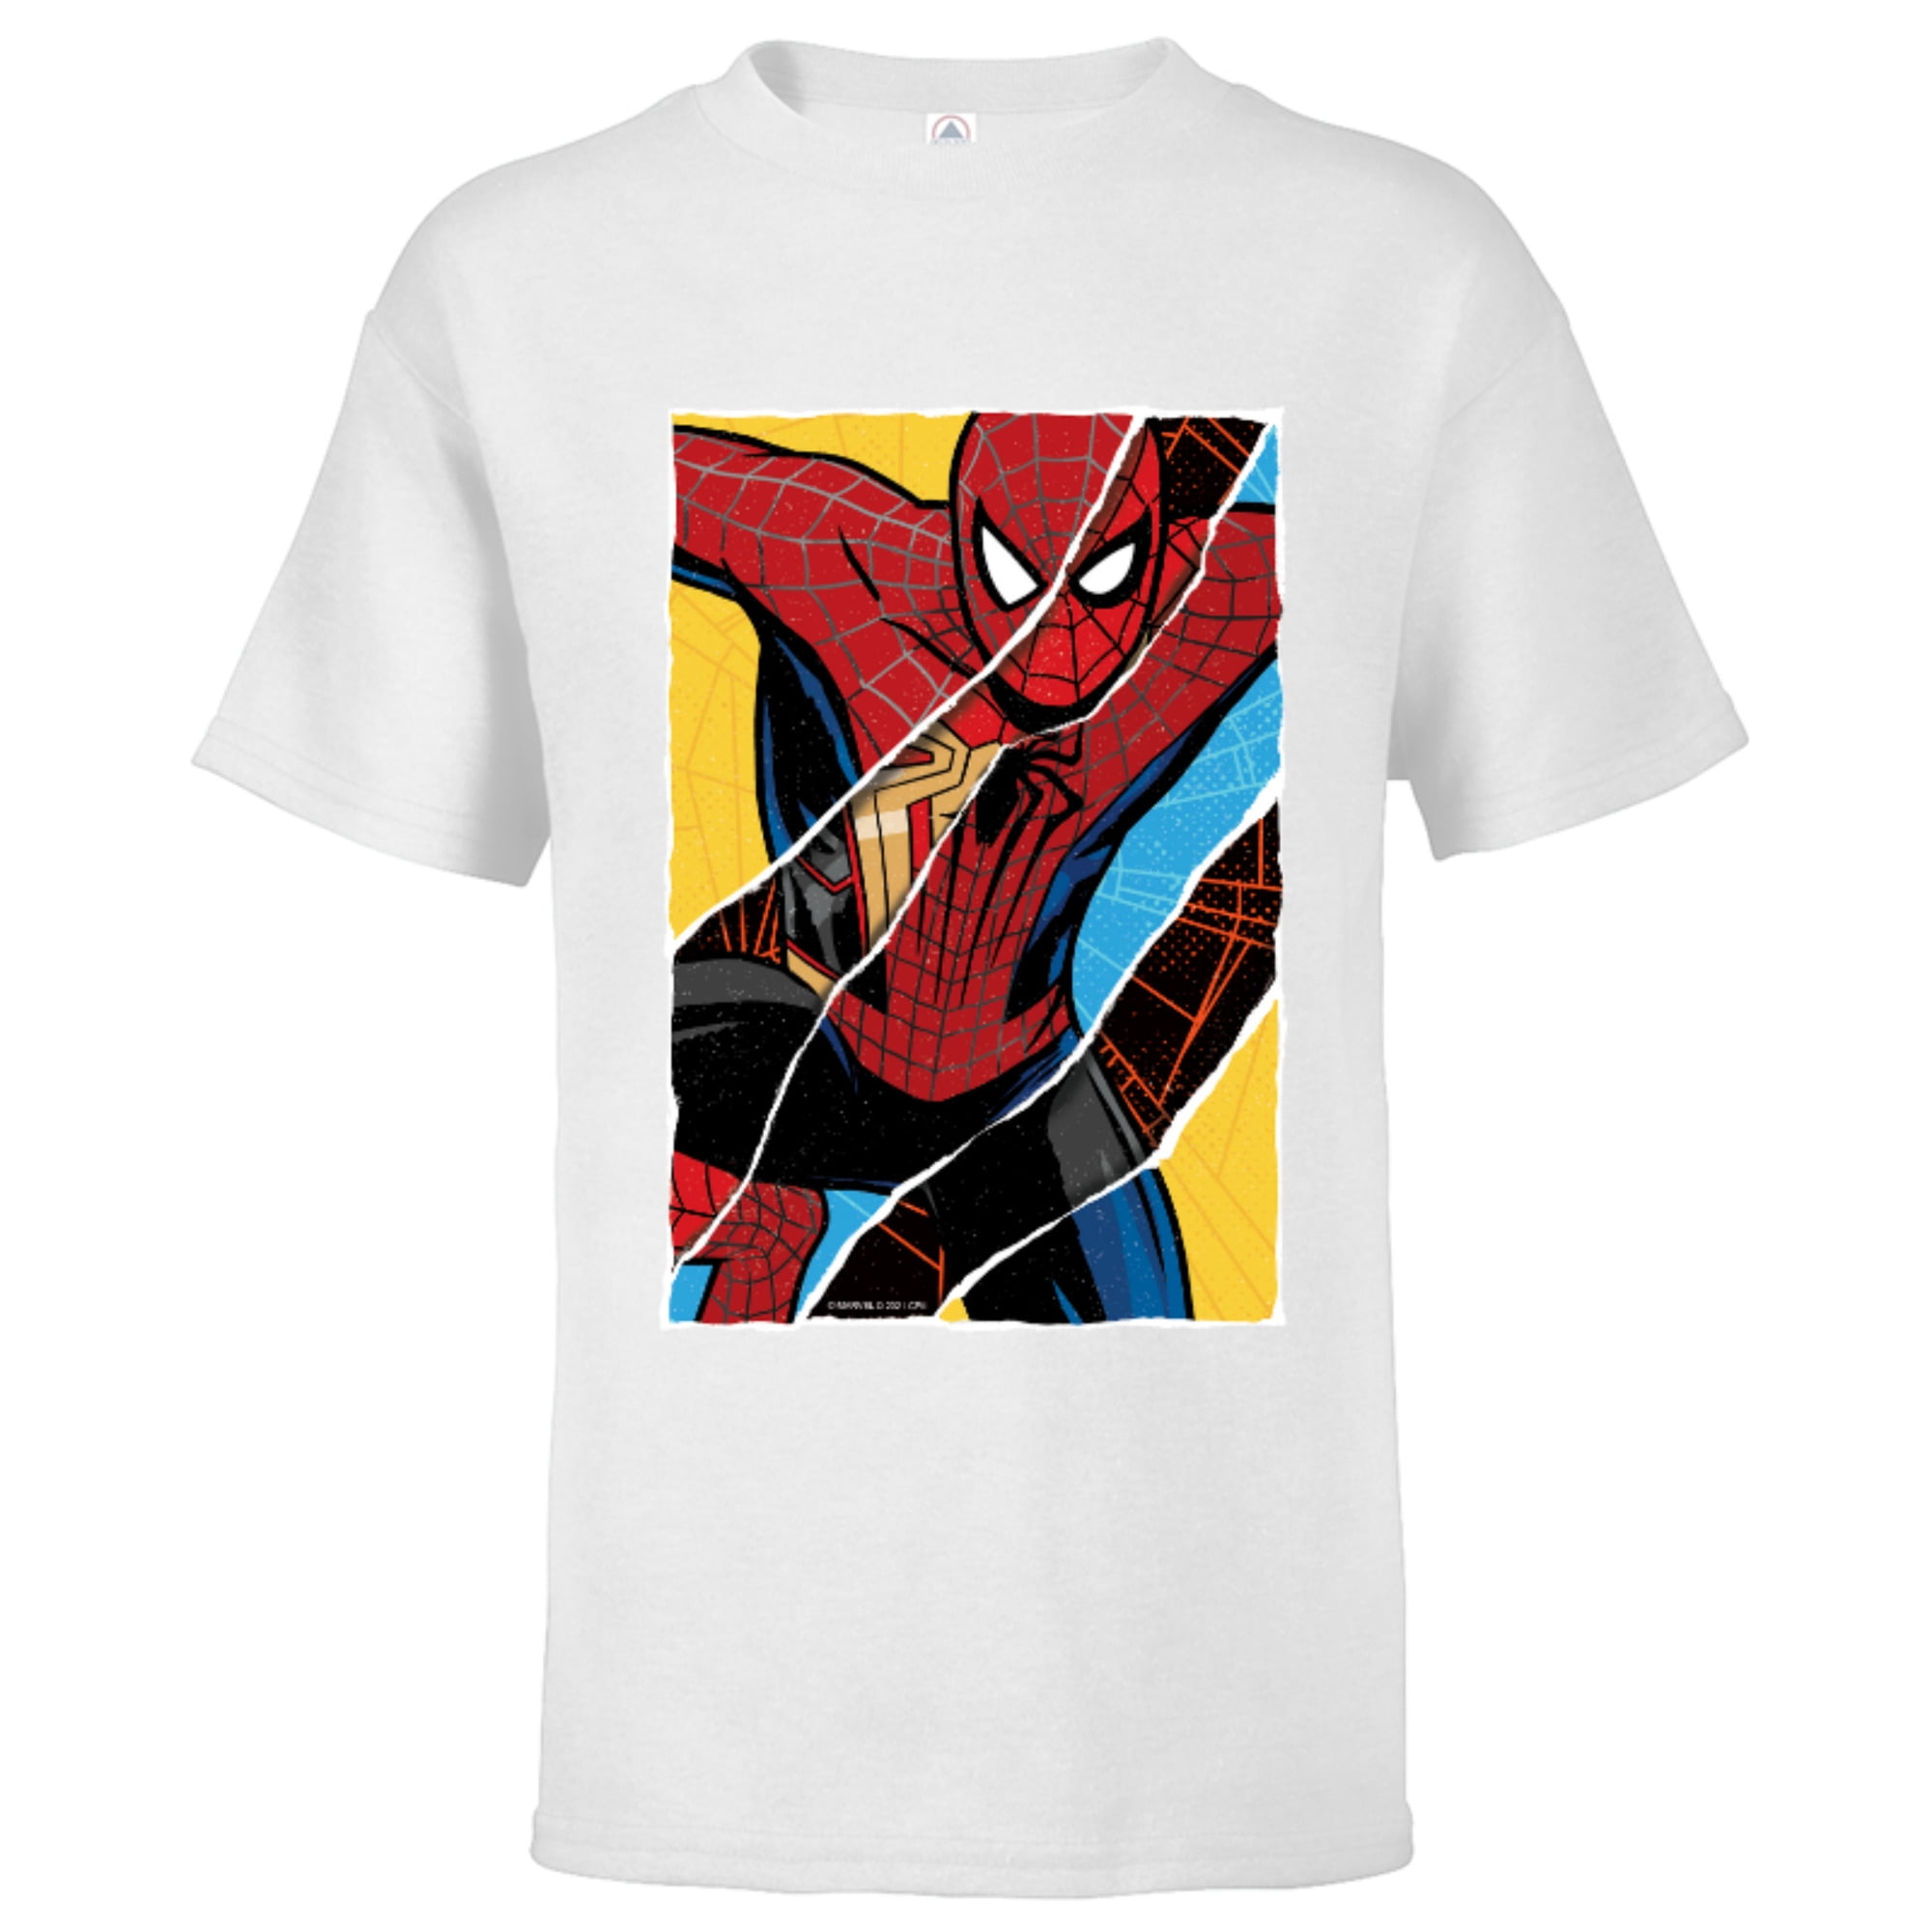 Customized-Black Collage Way Short for Comic Kids - Spider-Men Marvel - Sleeve Spider-Man: T-Shirt Home No